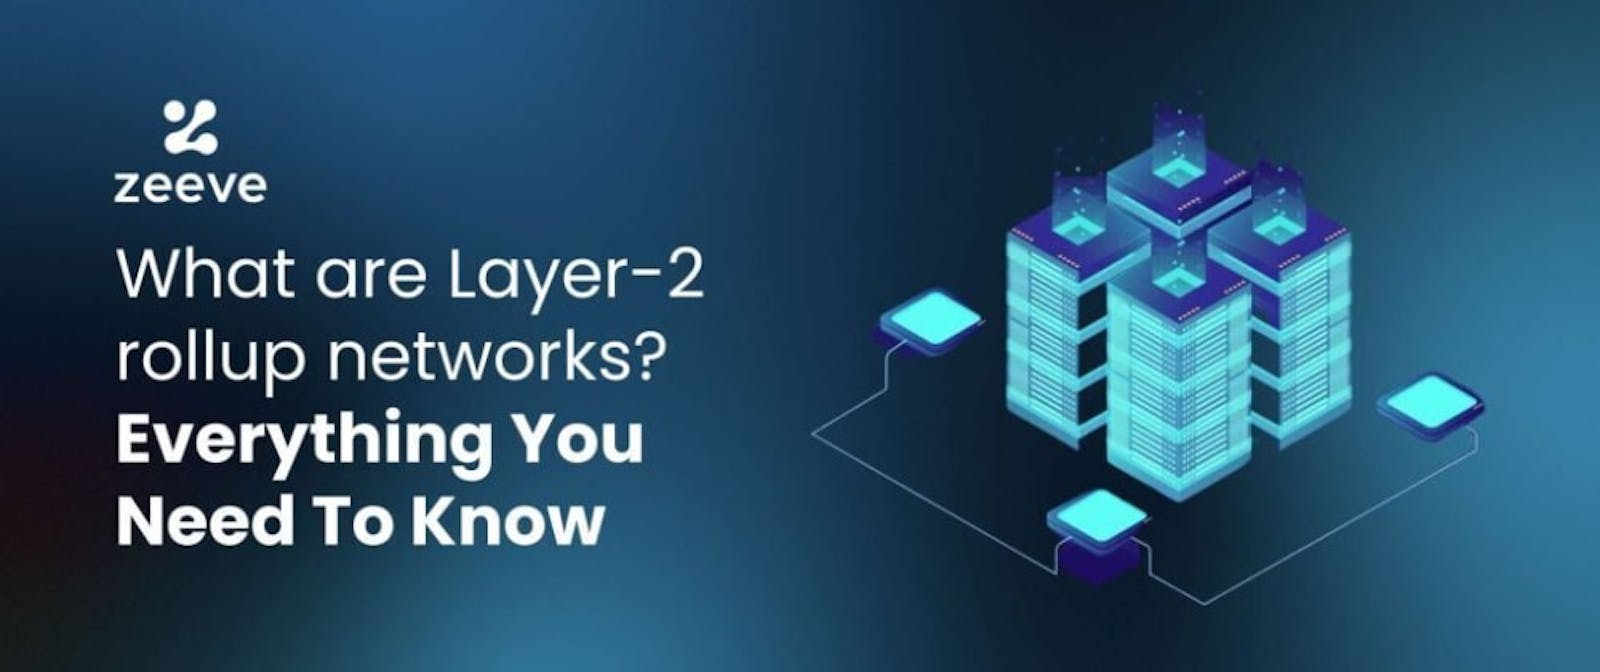 What are Layer-2 rollup networks? Everything You Need To Know